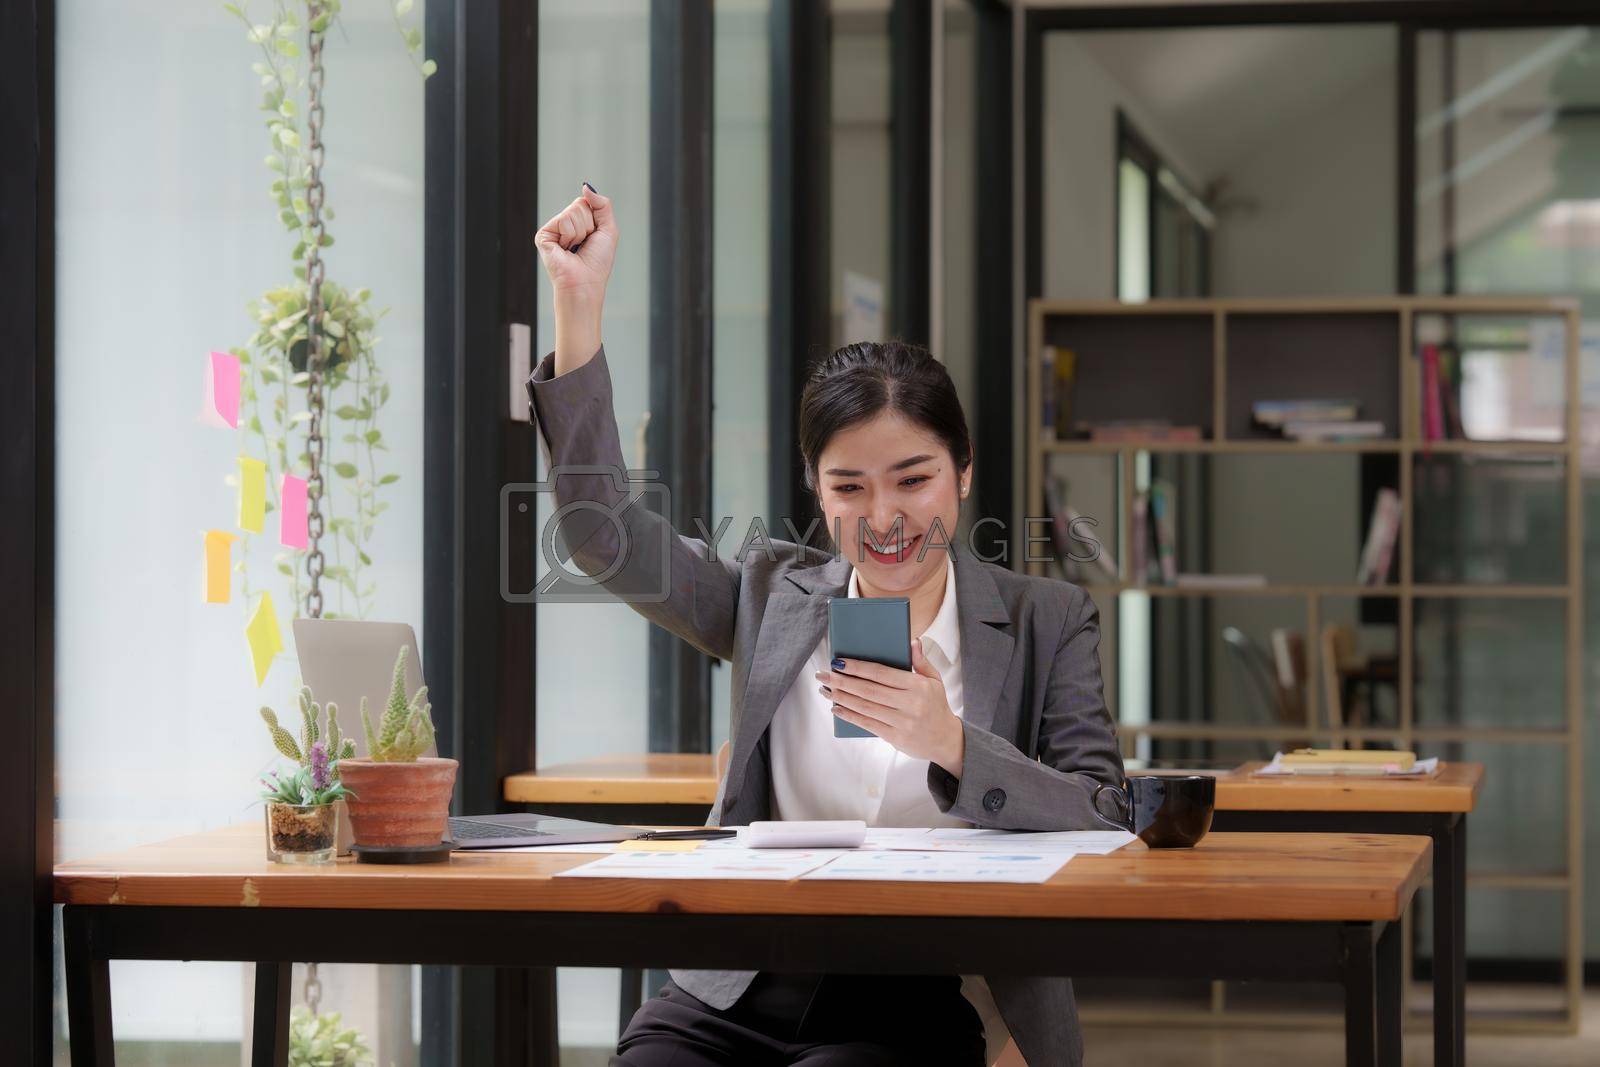 Royalty free image of Happy Asian man using smartphone while have a good news working at office by itchaznong